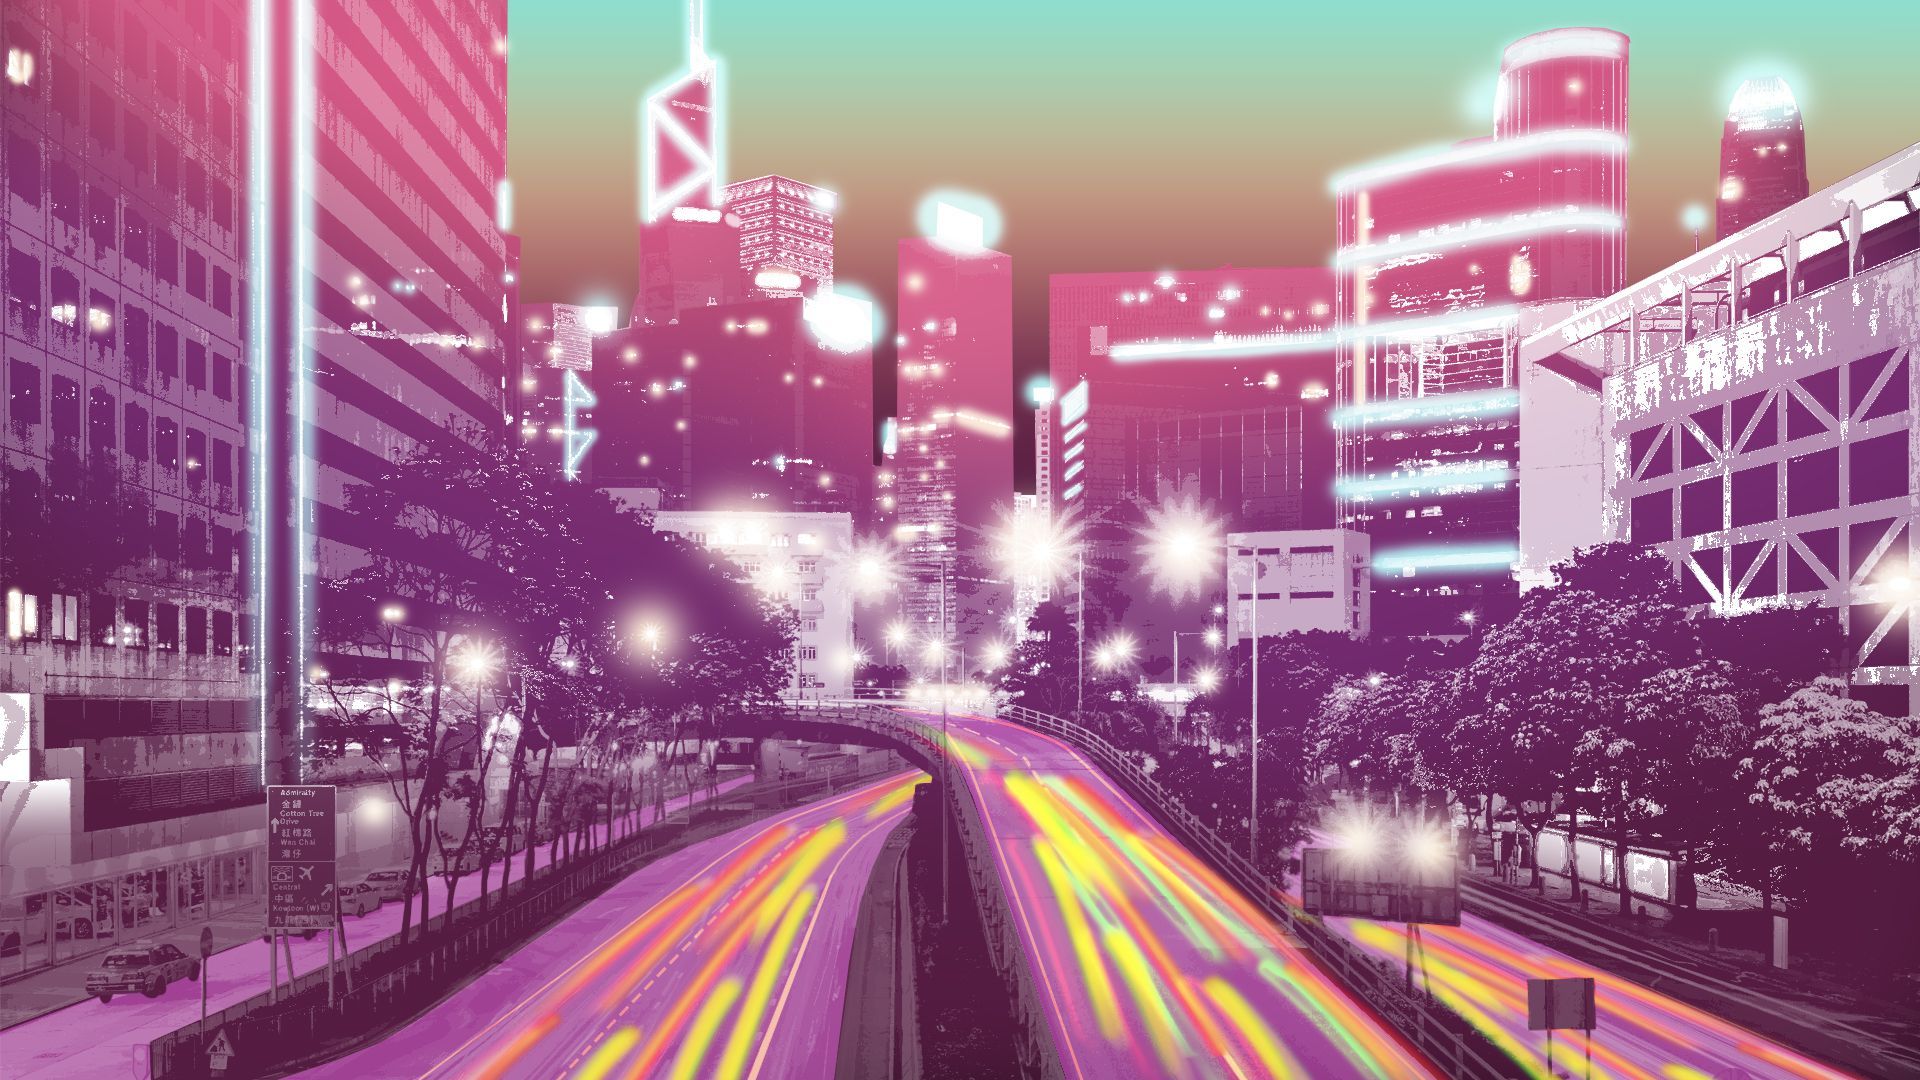 Illustration of a lit up cityscape at sunset featuring freeways filled with streaking lights